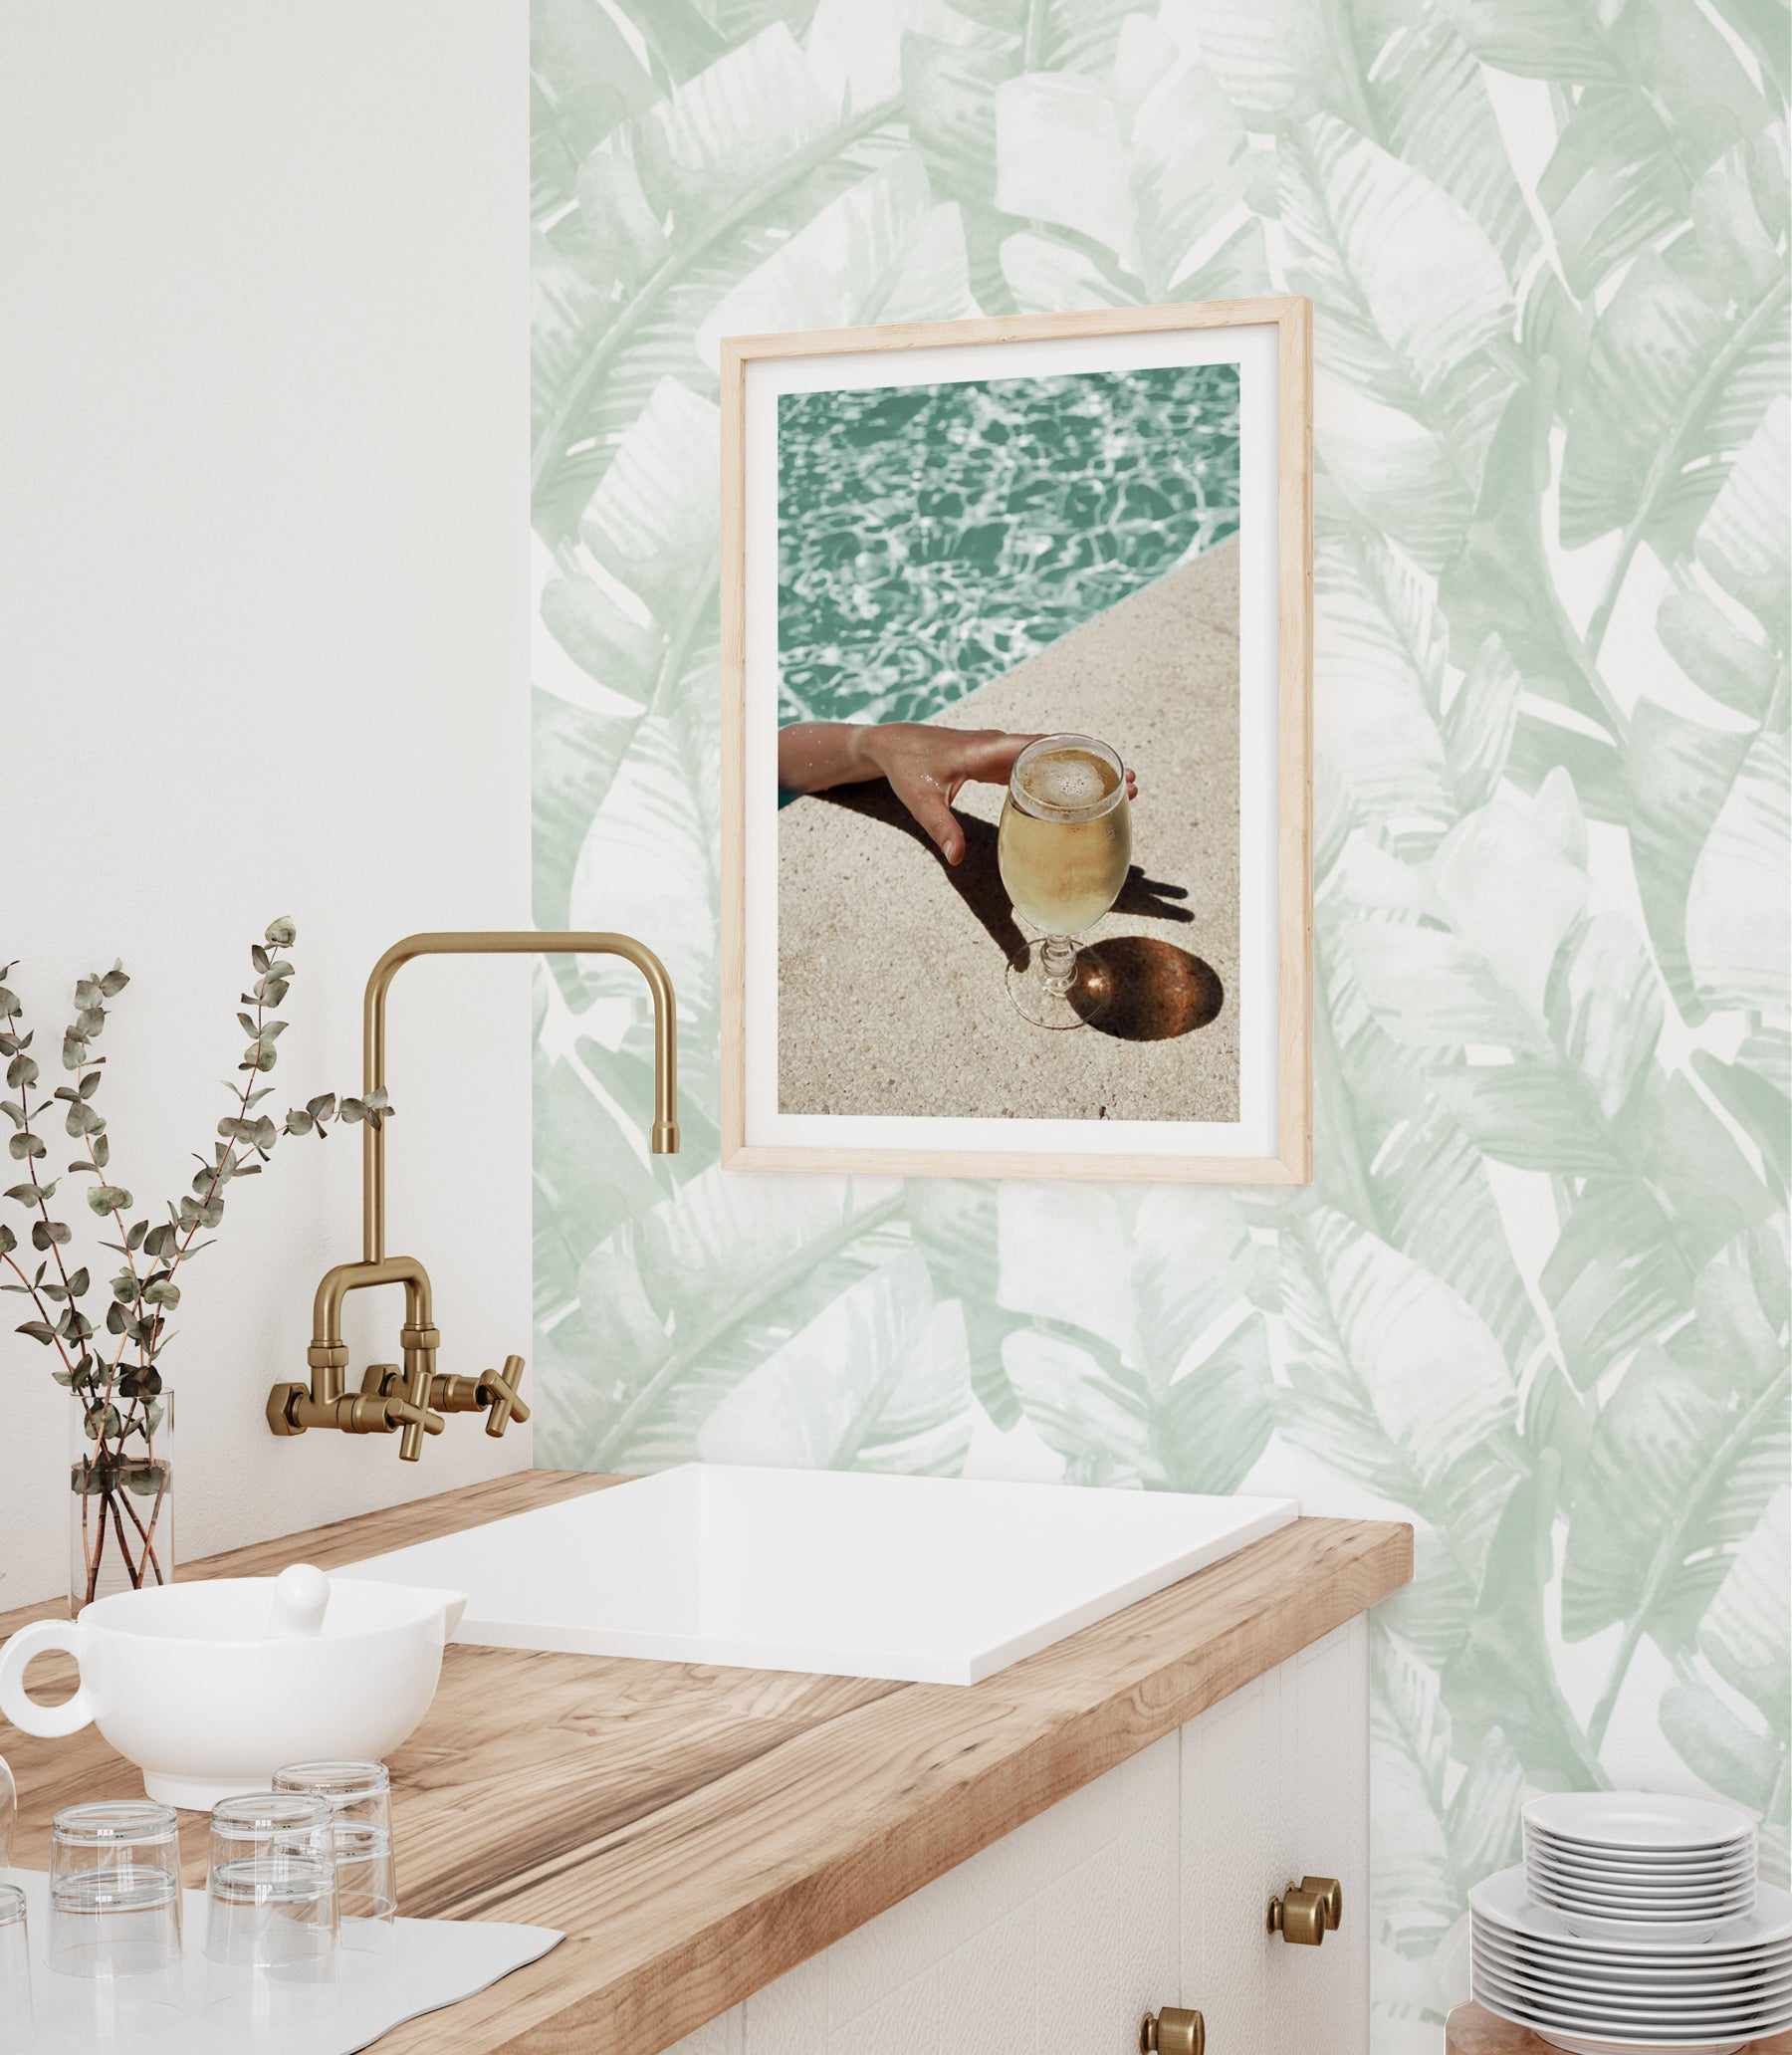 Wild Green Banana Leaf Peel and Stick Wallpaper For Wall